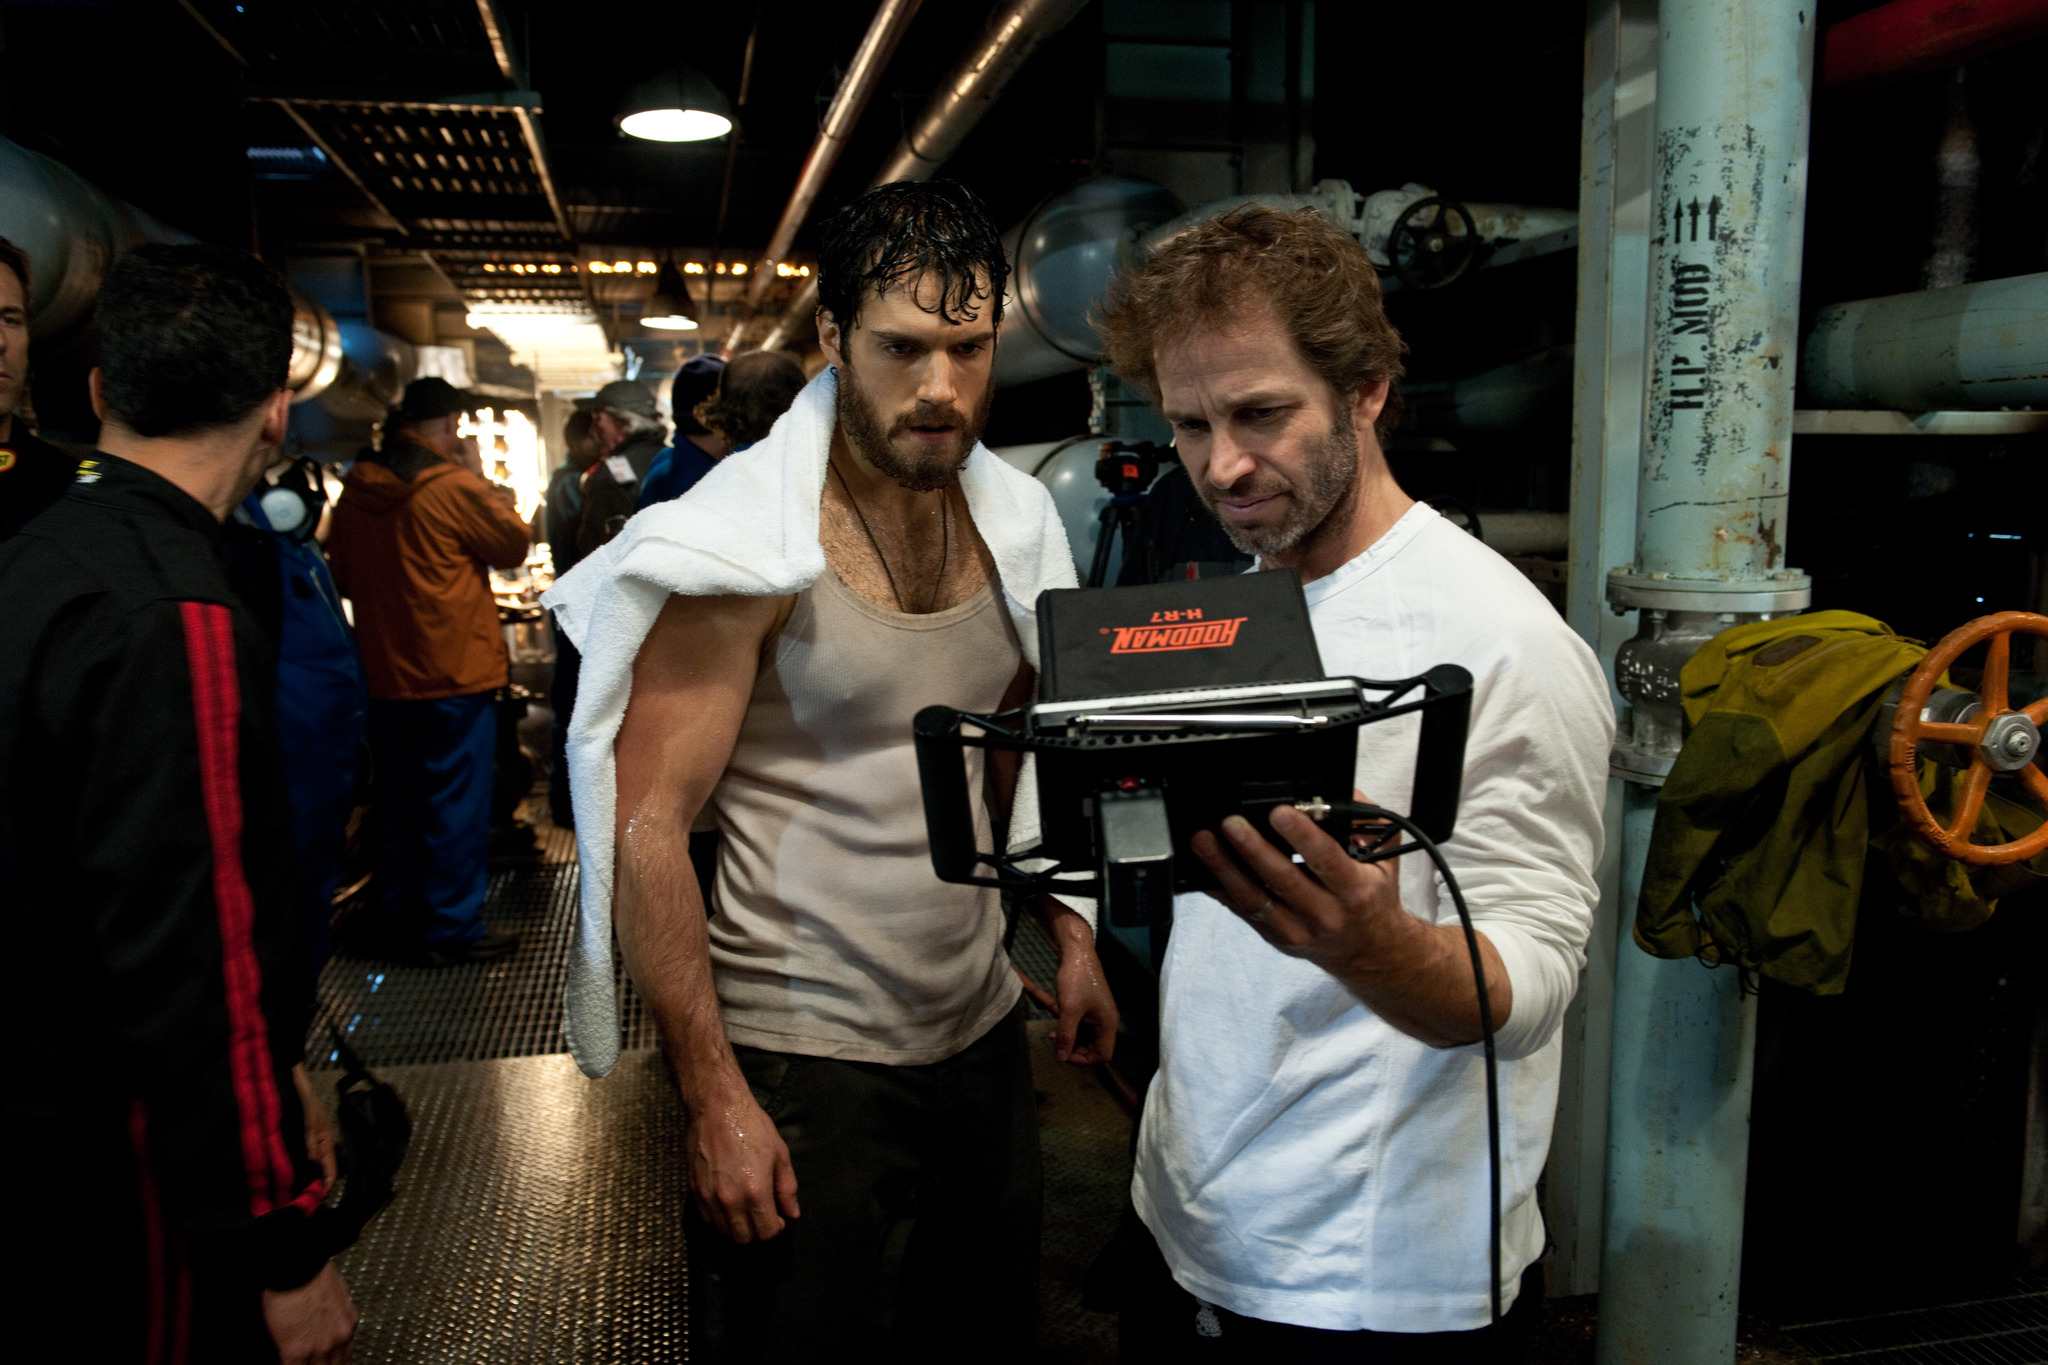 Henry Cavill and Zack Snyder in Zmogus is plieno (2013)